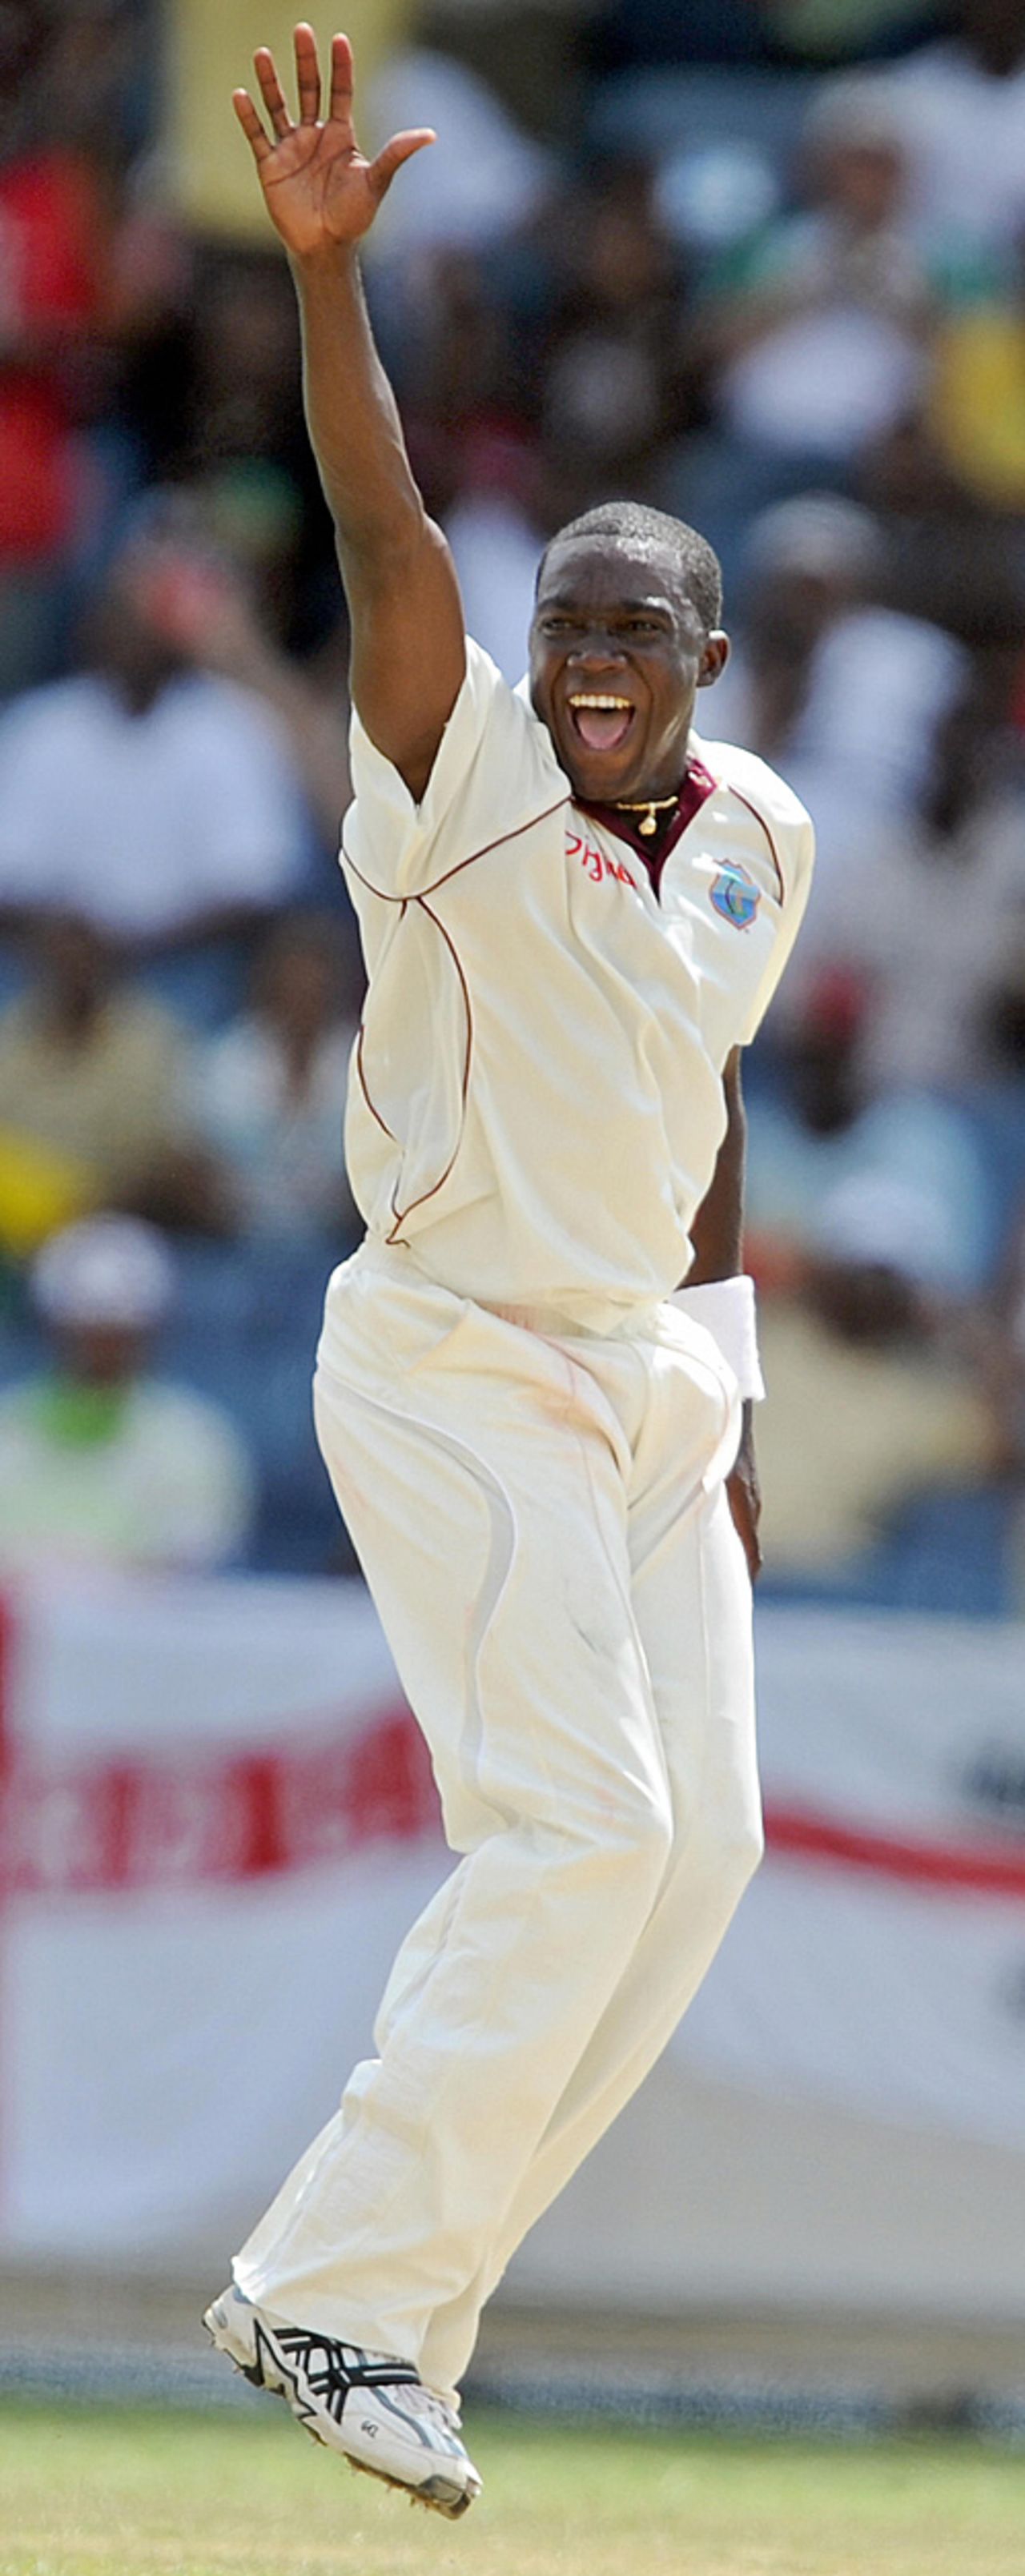 Jerome Taylor celebrates one of his five wickets against England, West Indies v England, 1st Test, Kingston, February 7, 2009